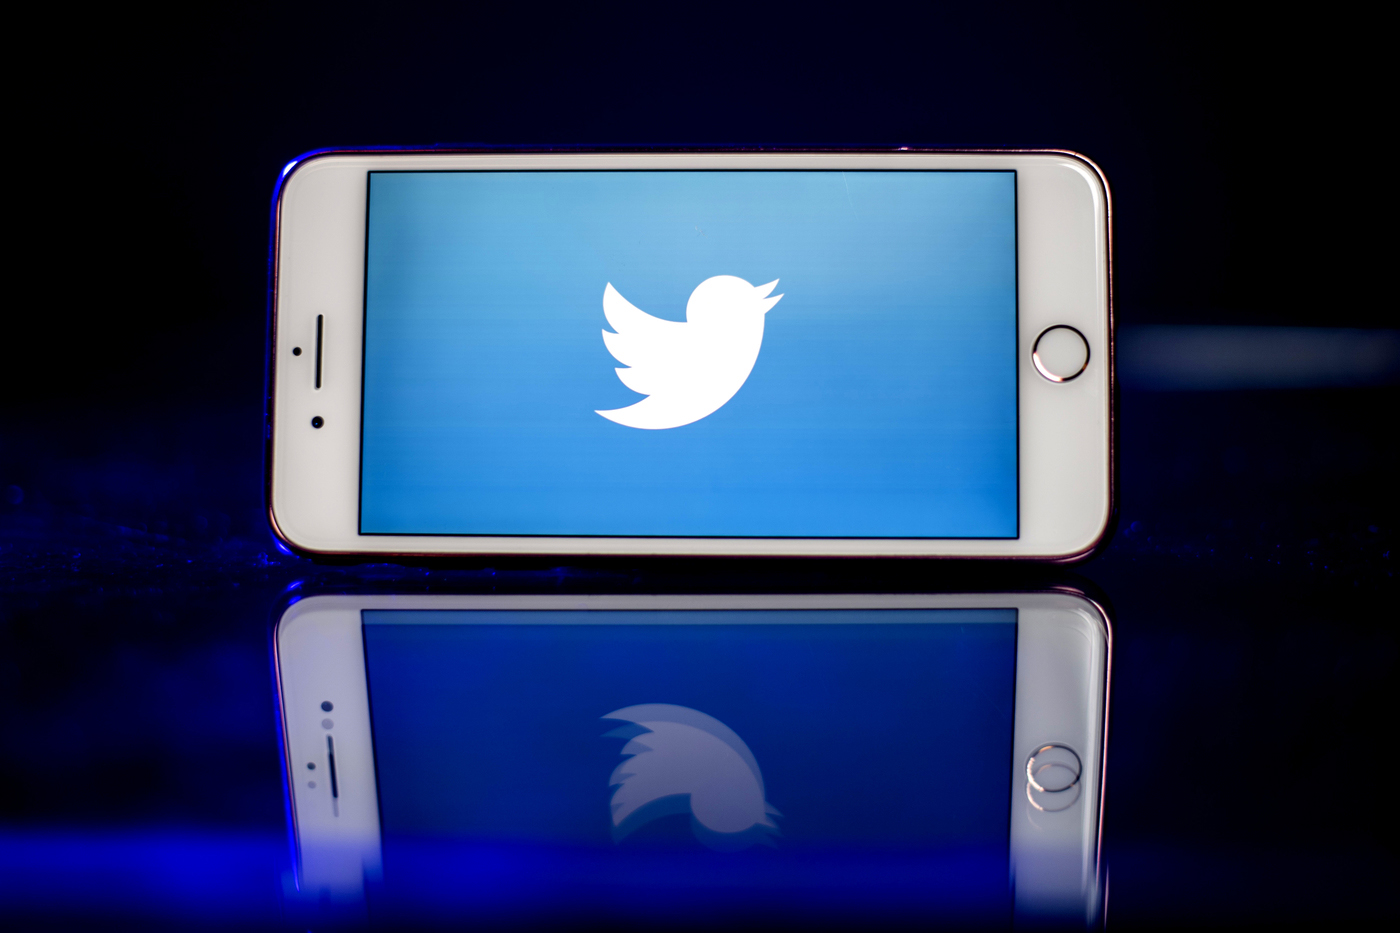 A smartphone with the Twitter logo on it